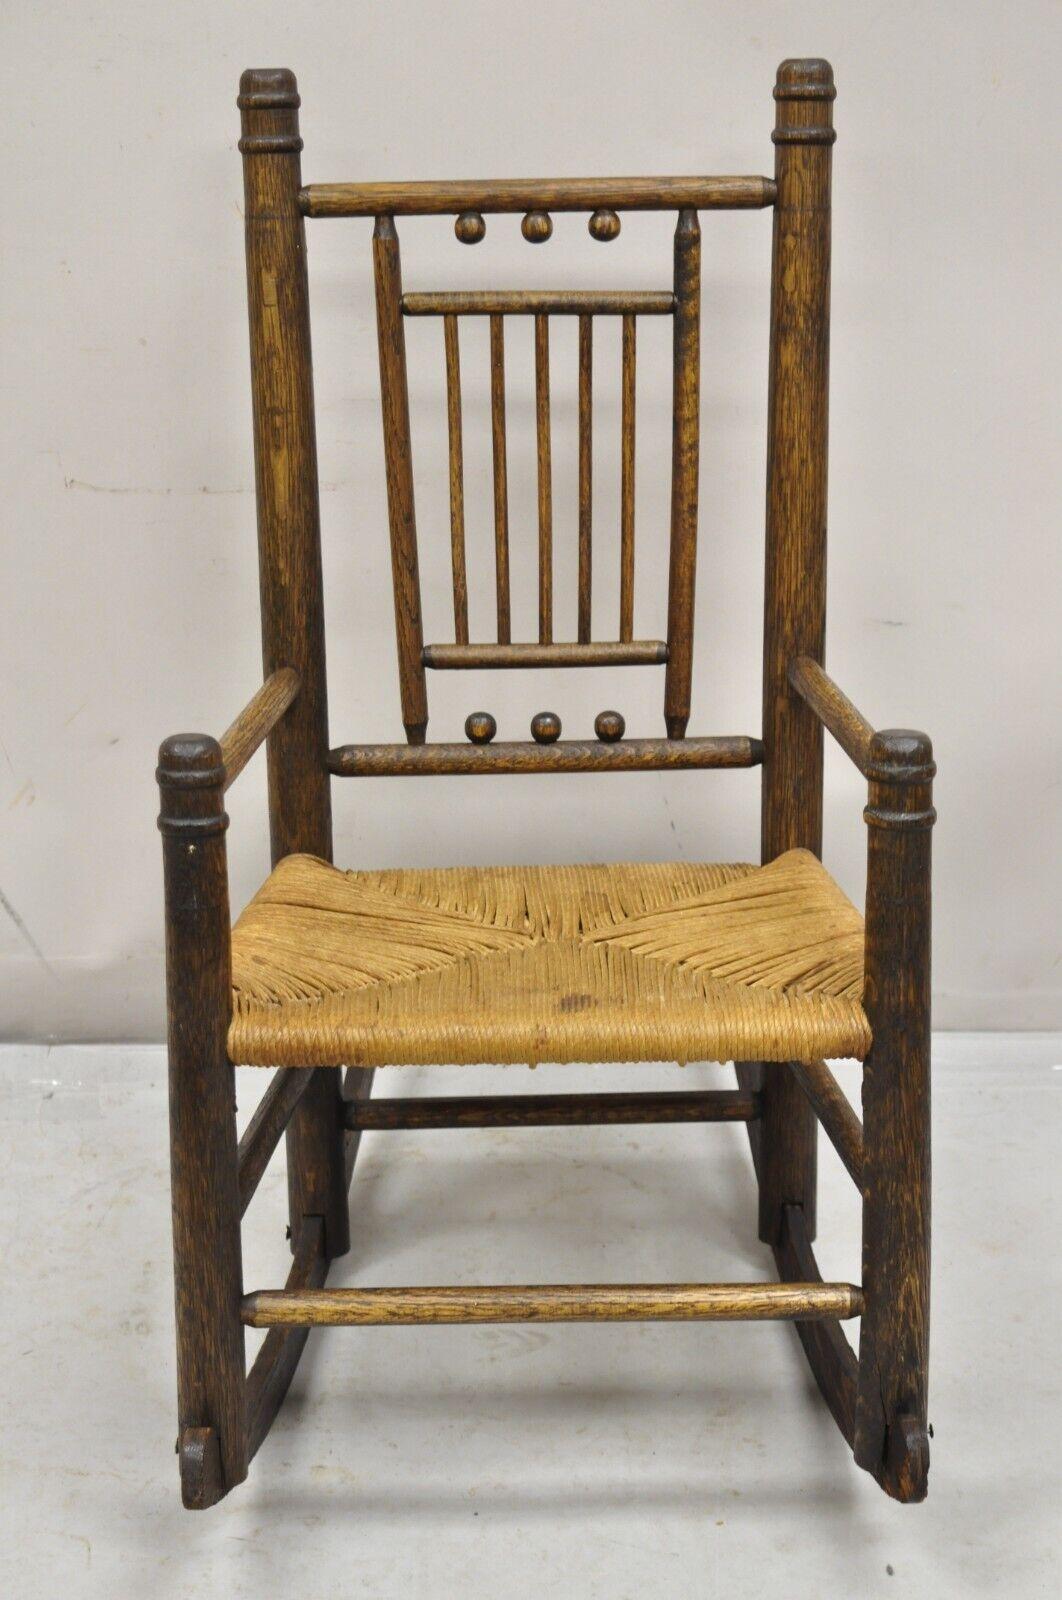 Antique Arts & Crafts Victorian Oak Wood Rush Seat Small Child's Rocking Chair. Item features woven rope cord seat, stick and ball clawed backrest, very unique child's chair.  Circa 19th Century. Measurements: 27